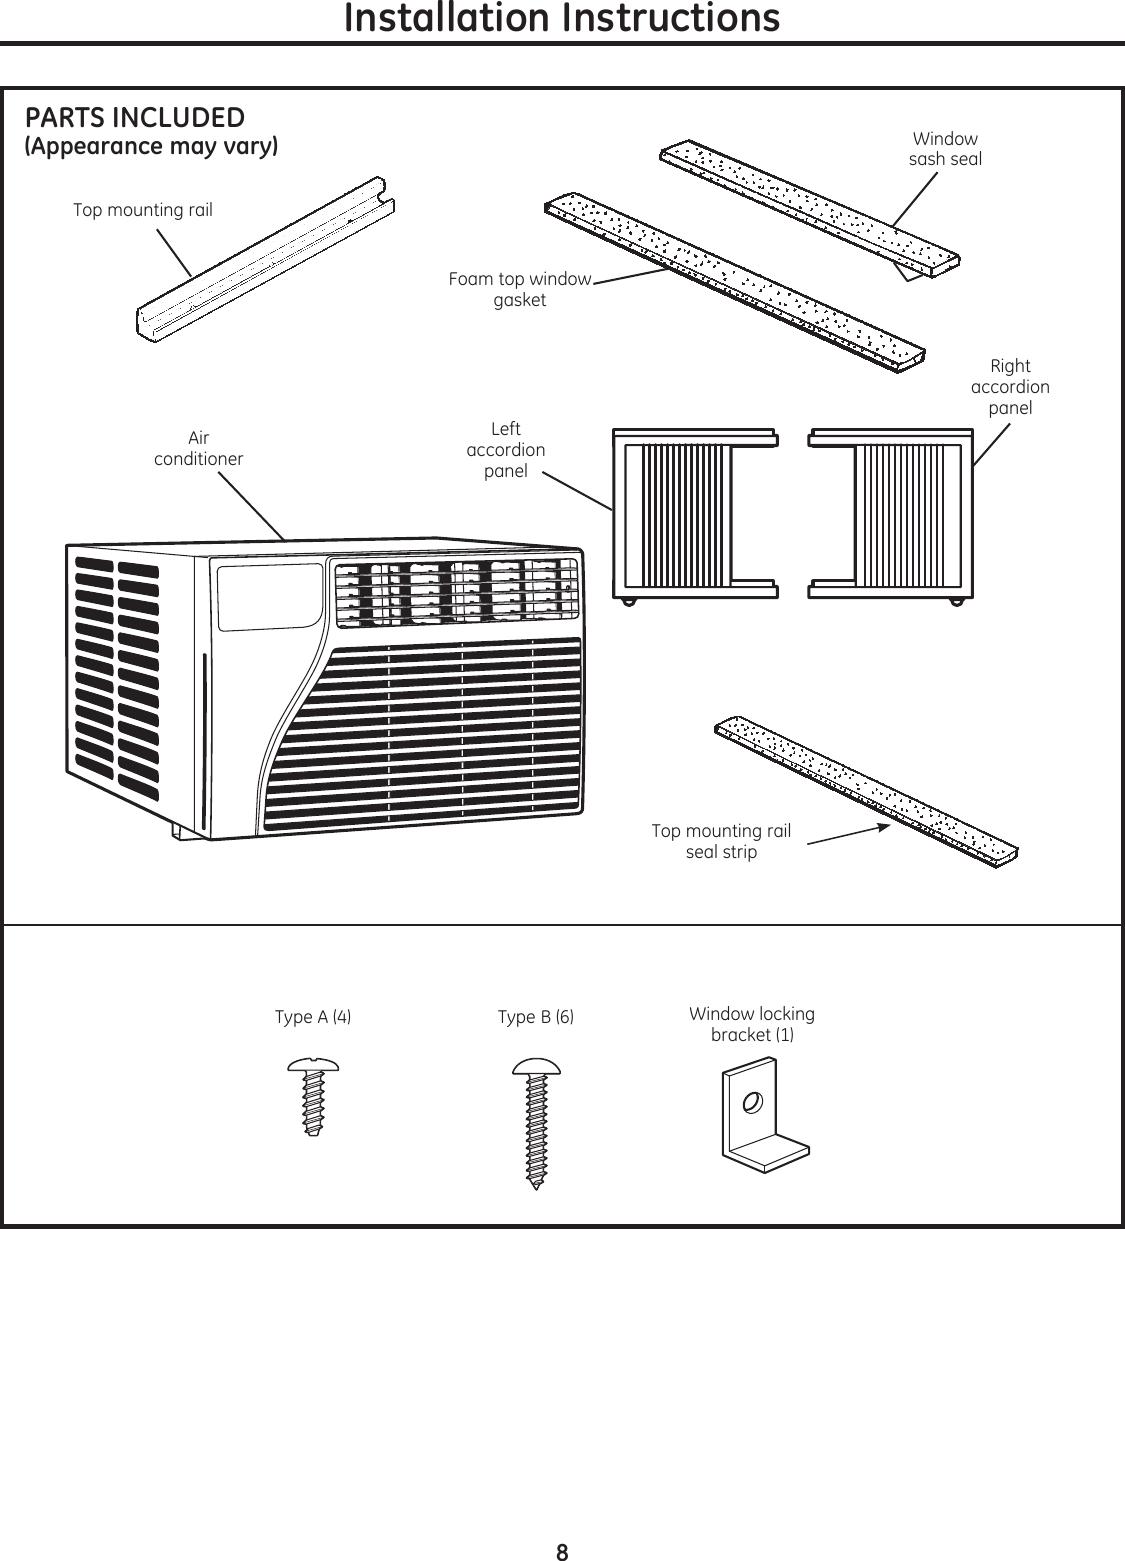 Installation InstructionsRight accordion panelType A (4) Type B (6)Foam top window gasketLeft accordion panelWindow sash sealTop mounting railAir  conditionerWindow locking  bracket (1)PARTS INCLUDED(Appearance may vary)Top mounting rail seal strip8